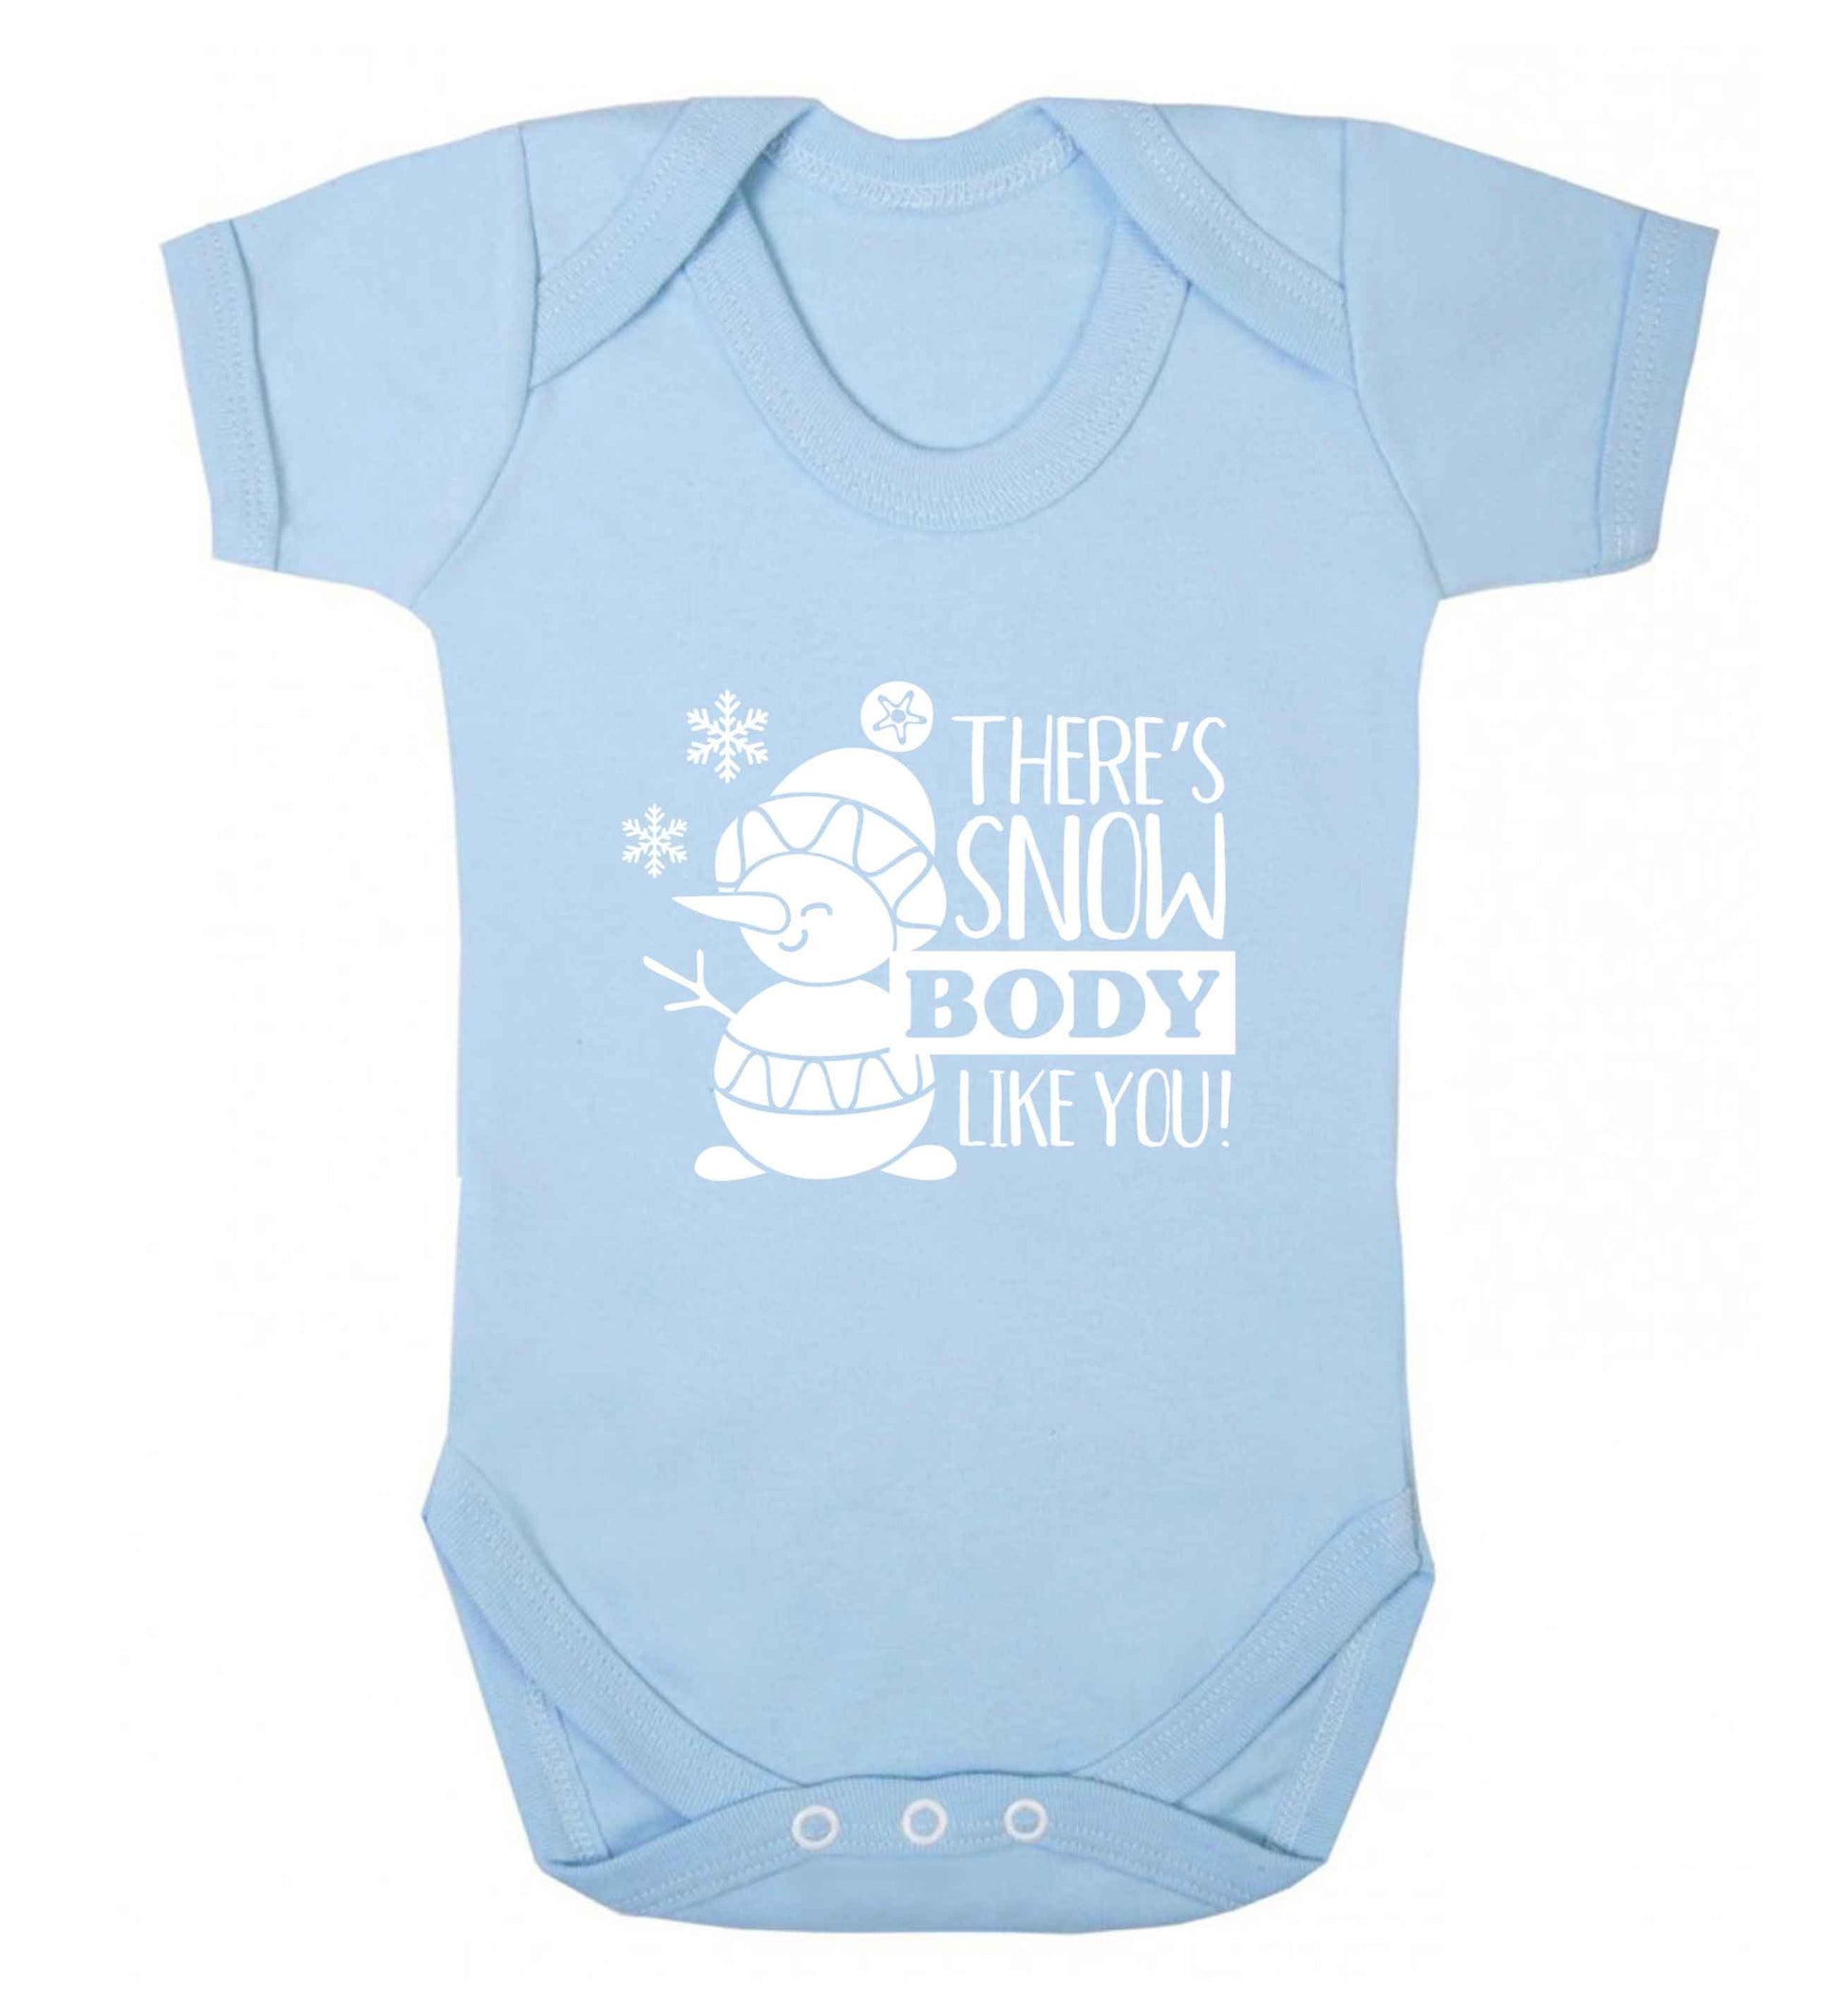 There's snow body like you baby vest pale blue 18-24 months